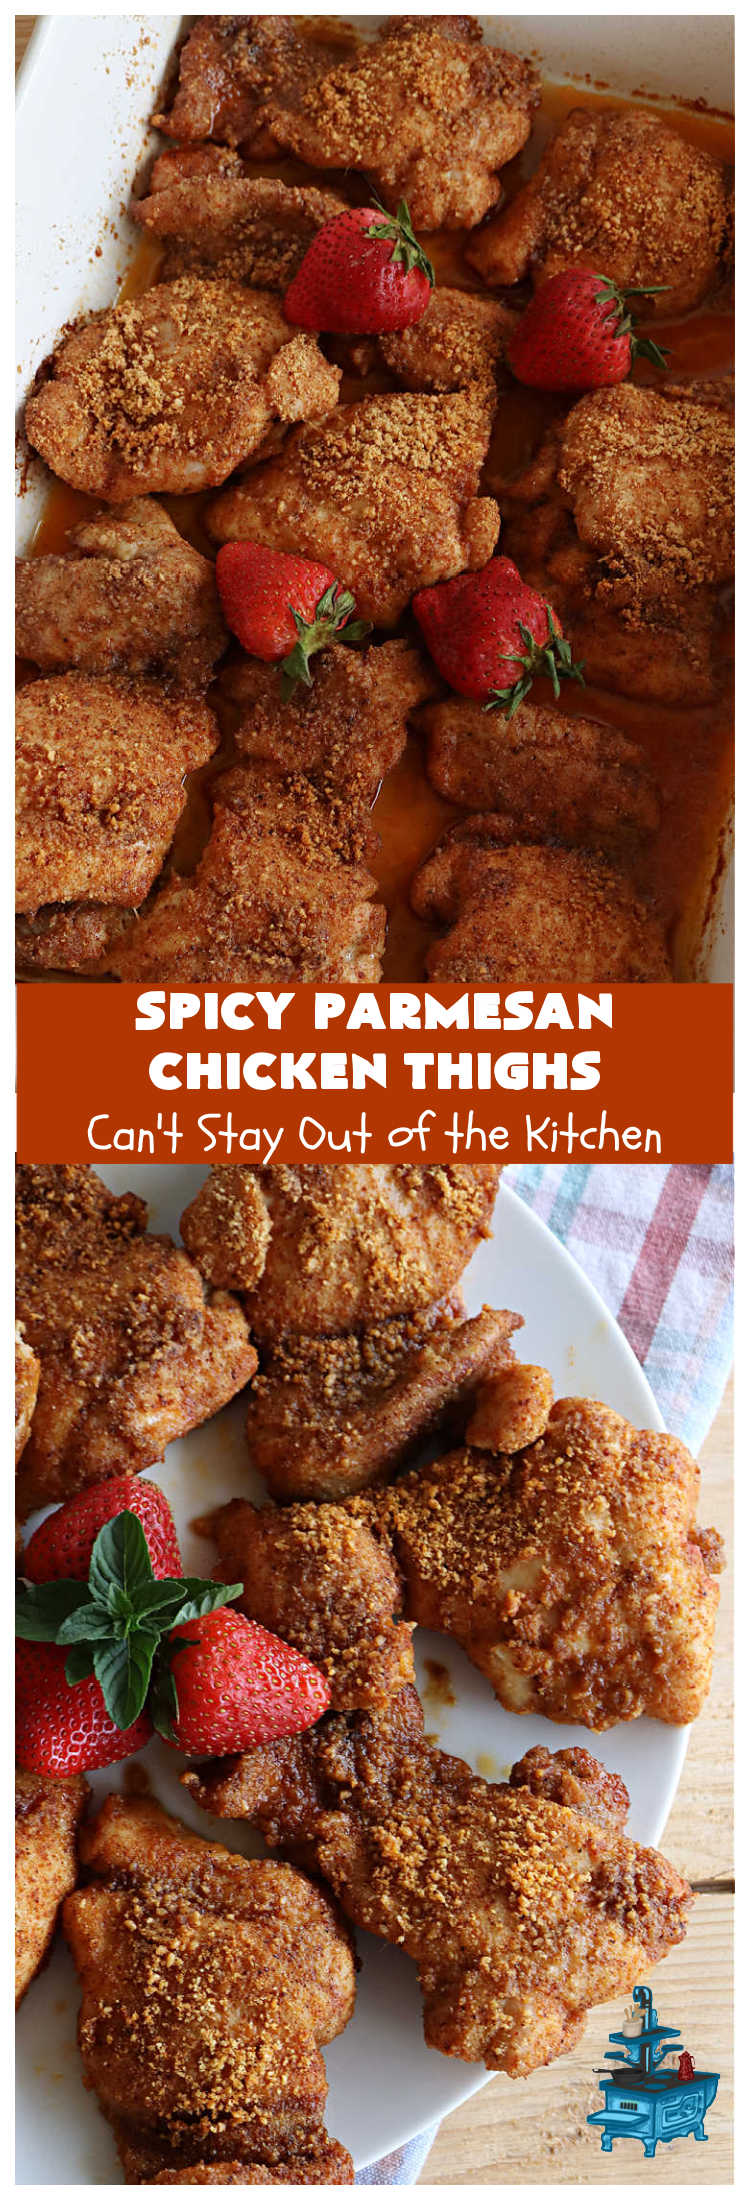 Spicy Parmesan Chicken Thighs | Can't Stay Out of the Kitchen | this #healthy #chicken #recipe is baked, NOT fried. It's marvelous for weeknight dinners because it's oven-ready in about 5 minutes. It's not overly spicy since the #ParmesanCheese mellows out the flavors. Great way to use #ChickenThighs too. #poultry #SpicyParmesanChickenThighs